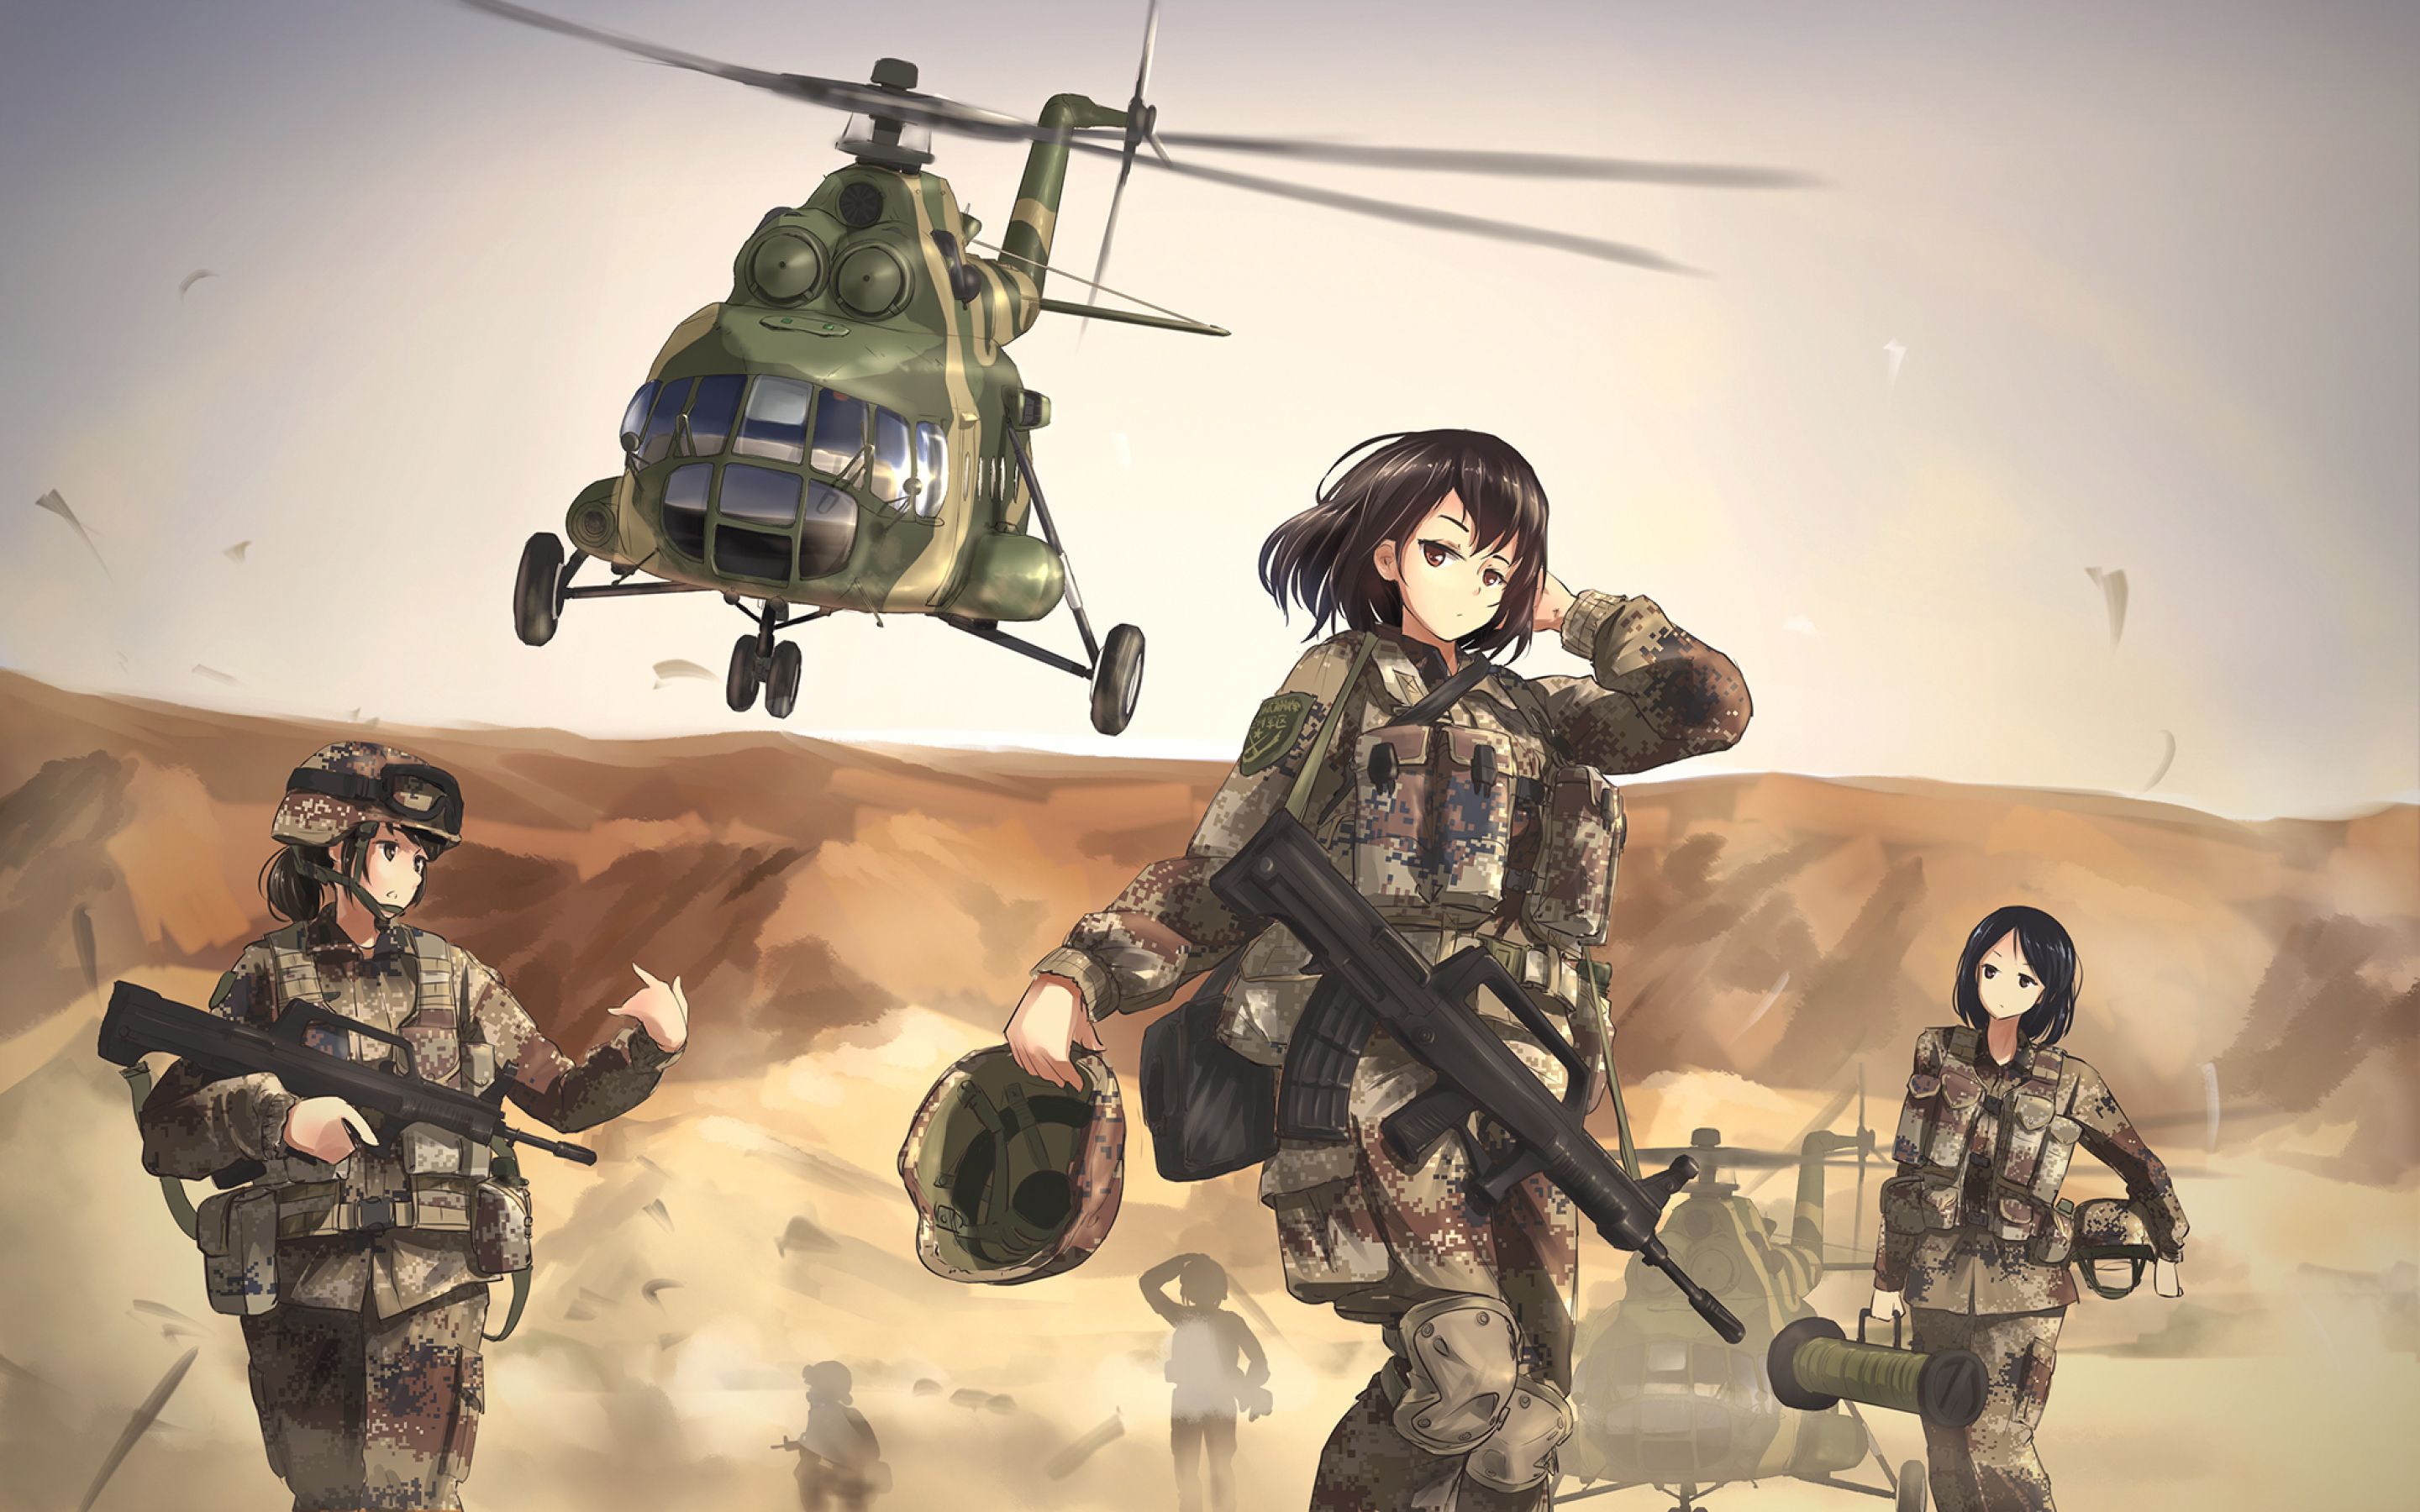 Free Helicopter rides poster – Anime Girl Propaganda